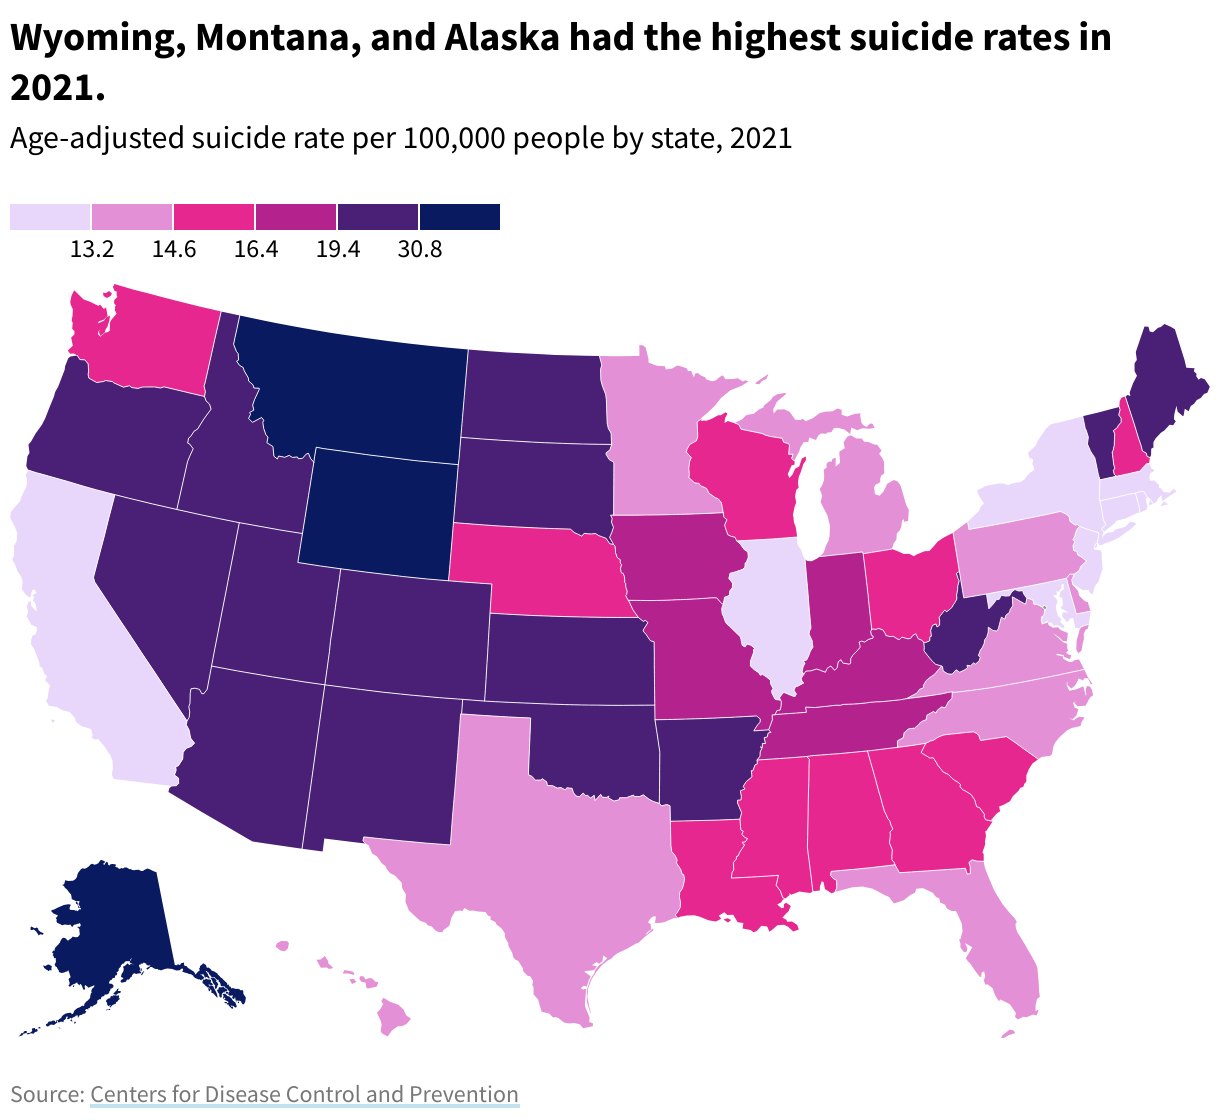 Map of the United States showing suicide rates by state for 2021. Wyoming, Montana, and Alaska had the highest suicide rates that year. 